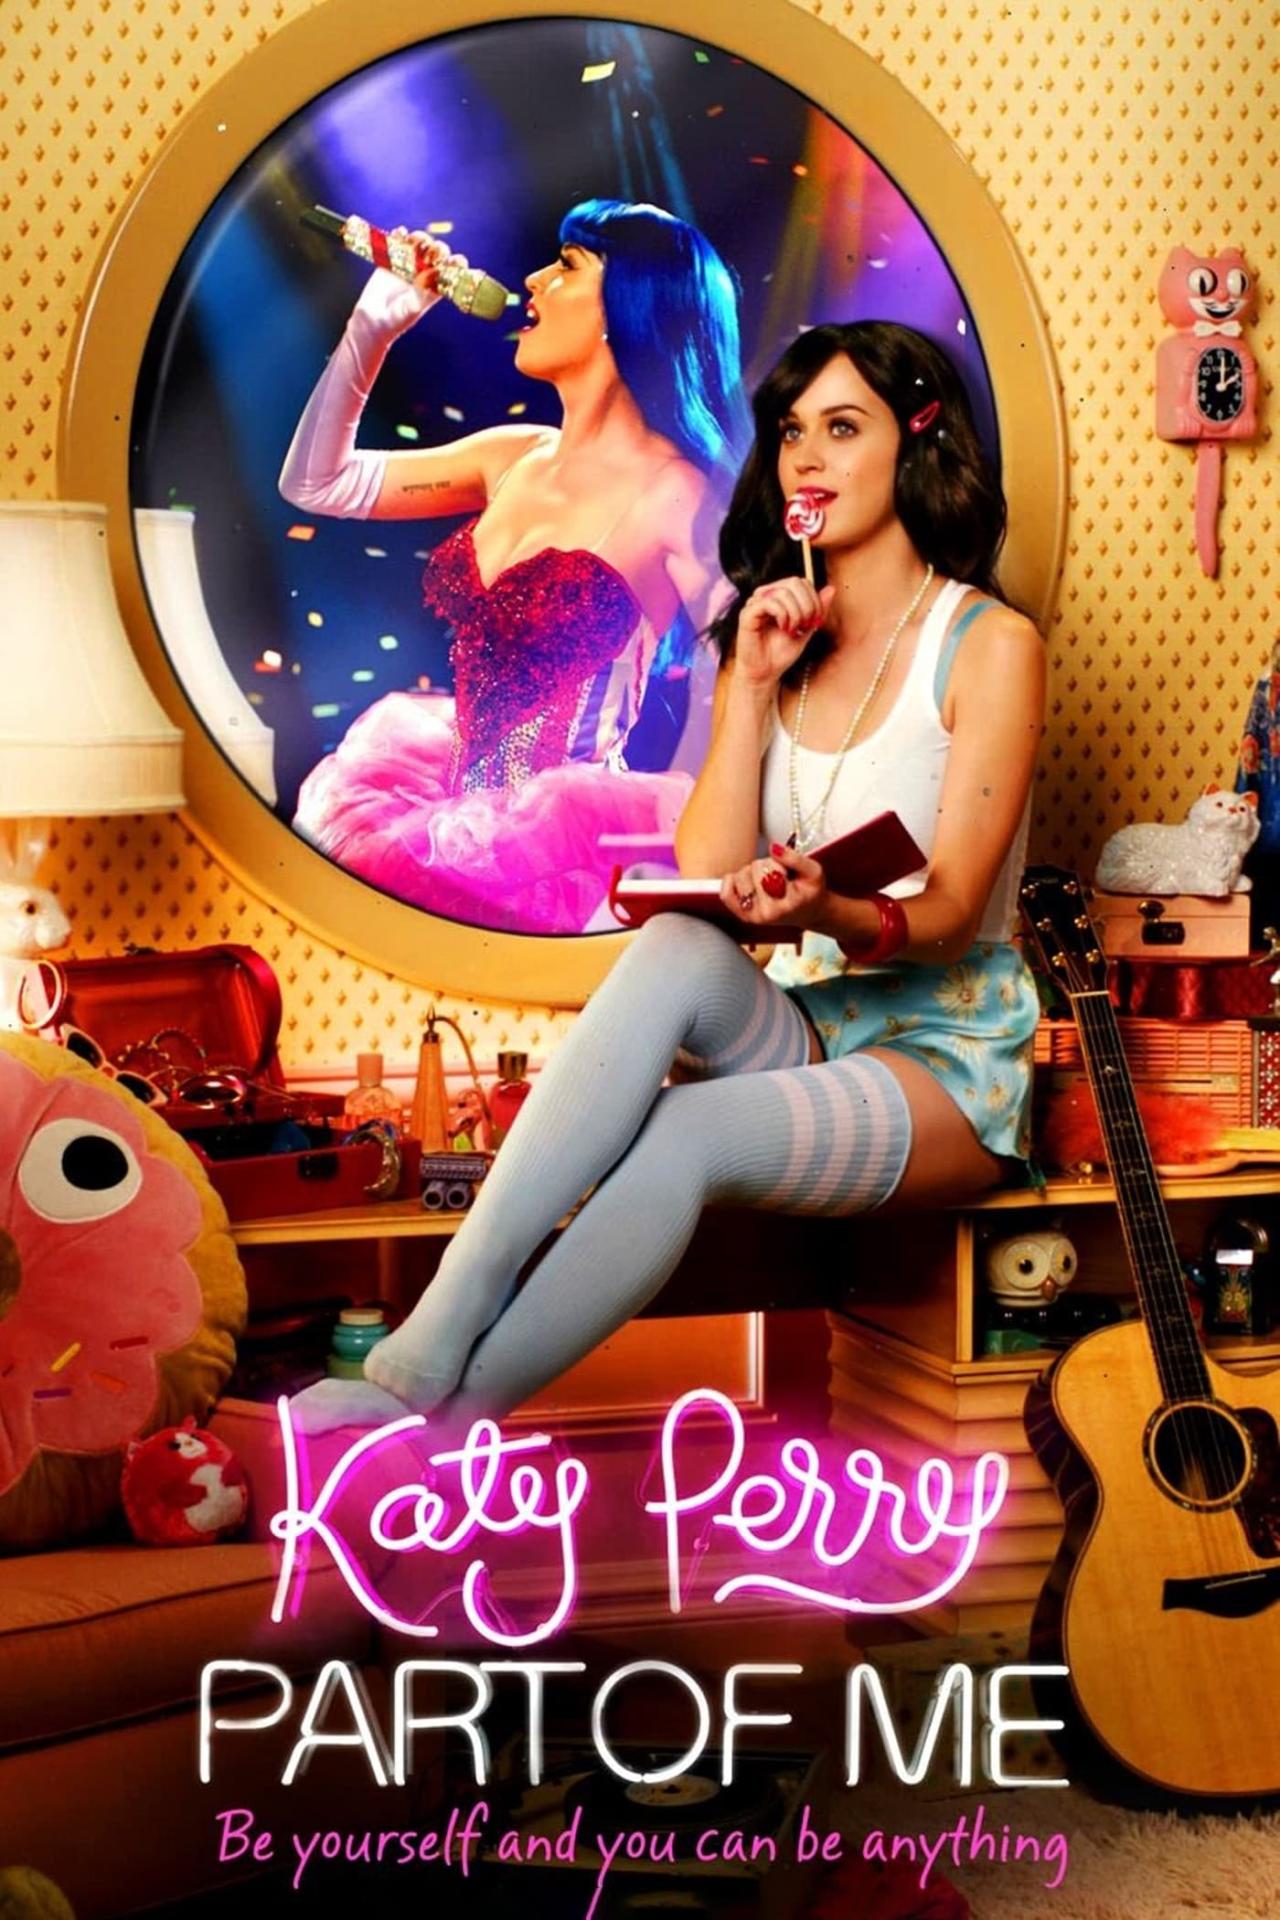 Affiche du film Katy Perry: Part of Me poster